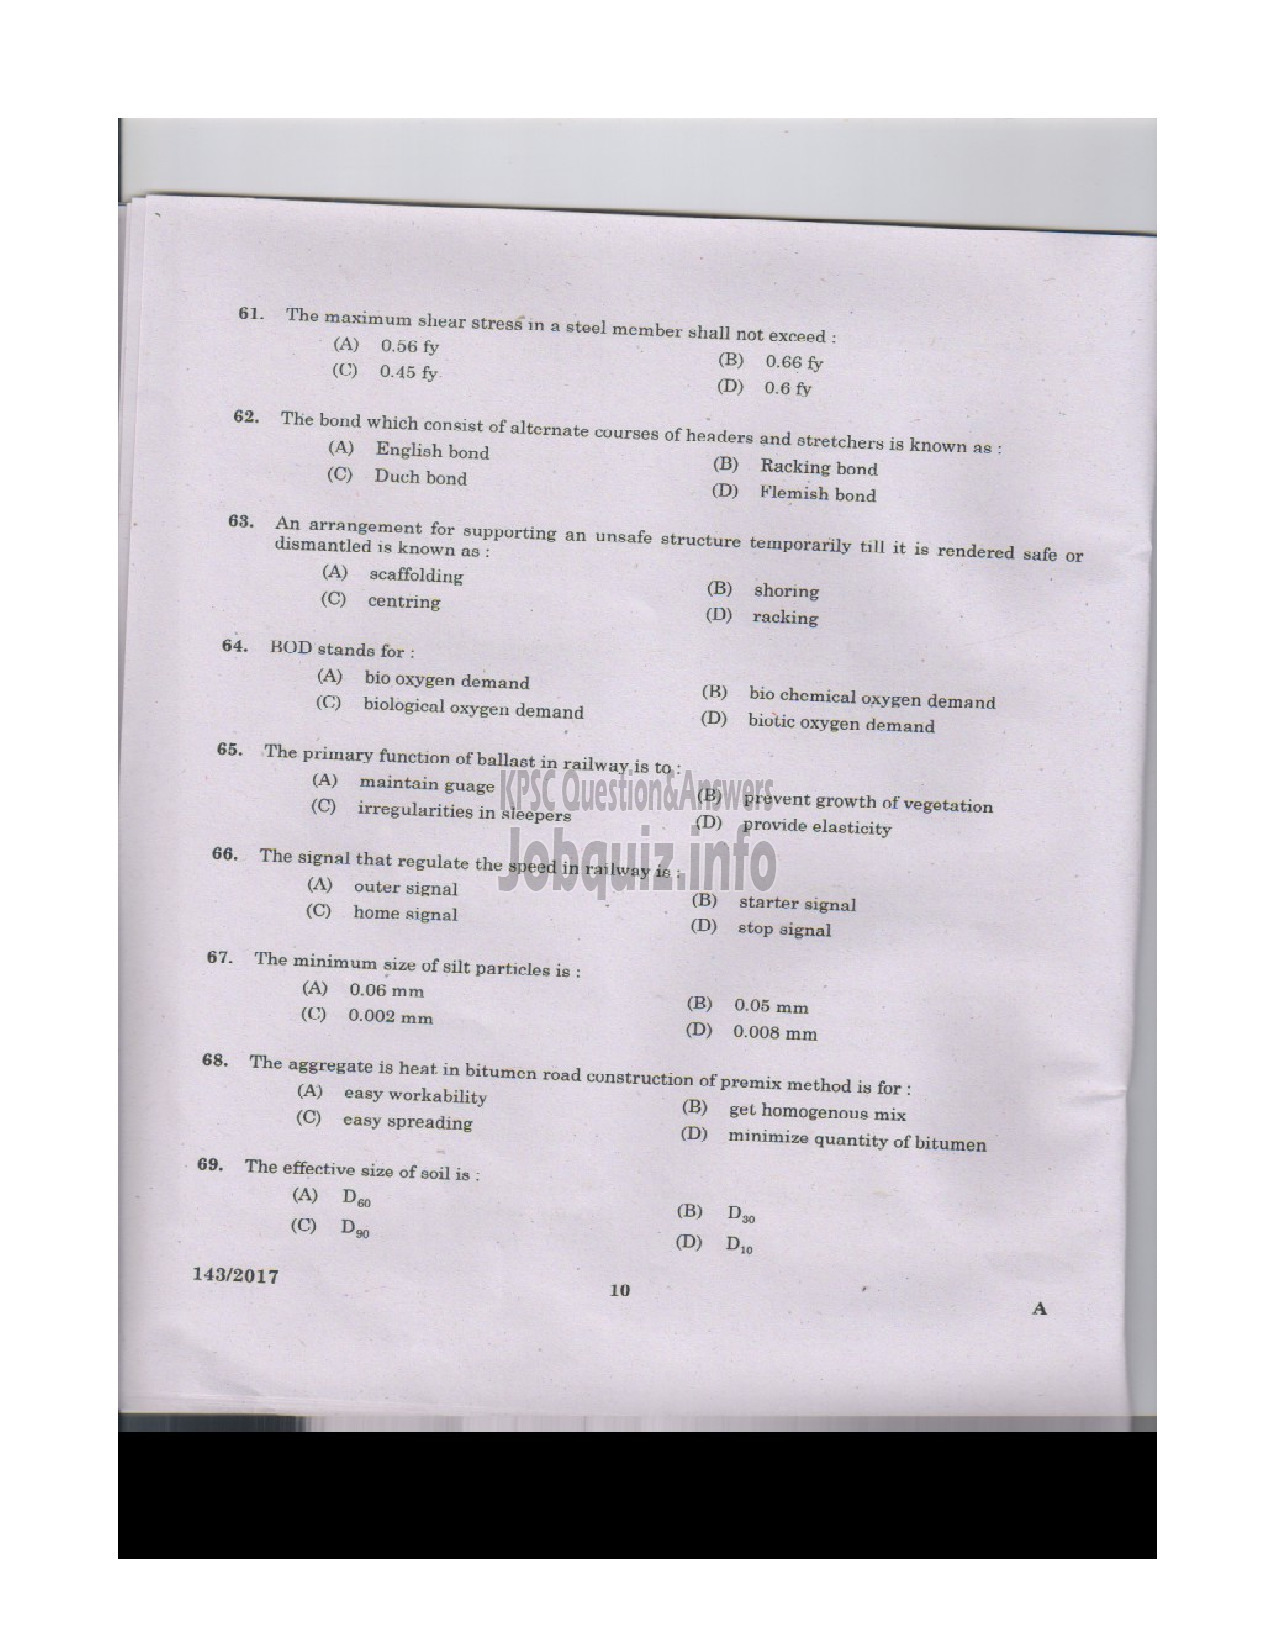 Kerala PSC Question Paper - VOCATIONAL INSTRUCTOR IN CIVIL CONSTRUCTION ANDMAINTENANCE VOCATIONAL HIGHER SECONDARY-9